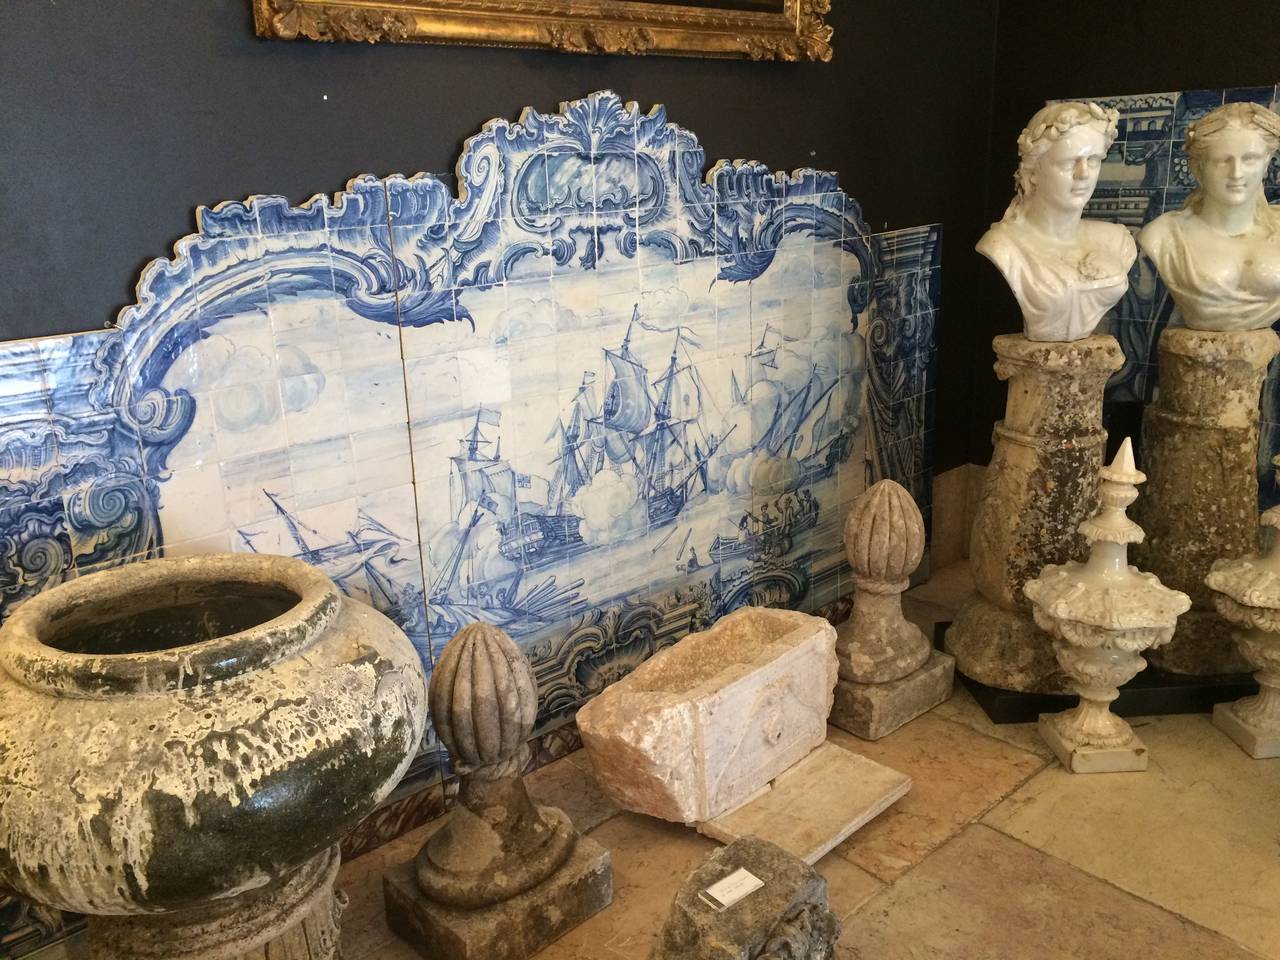 Azulejos mural of the 18th century in cobalt blue over white, manufactured in Lisbon with 234 tiles. The frame is composed of assymetrical shells and pilasters on each side. The center of the piece portraits a navy battle between two different